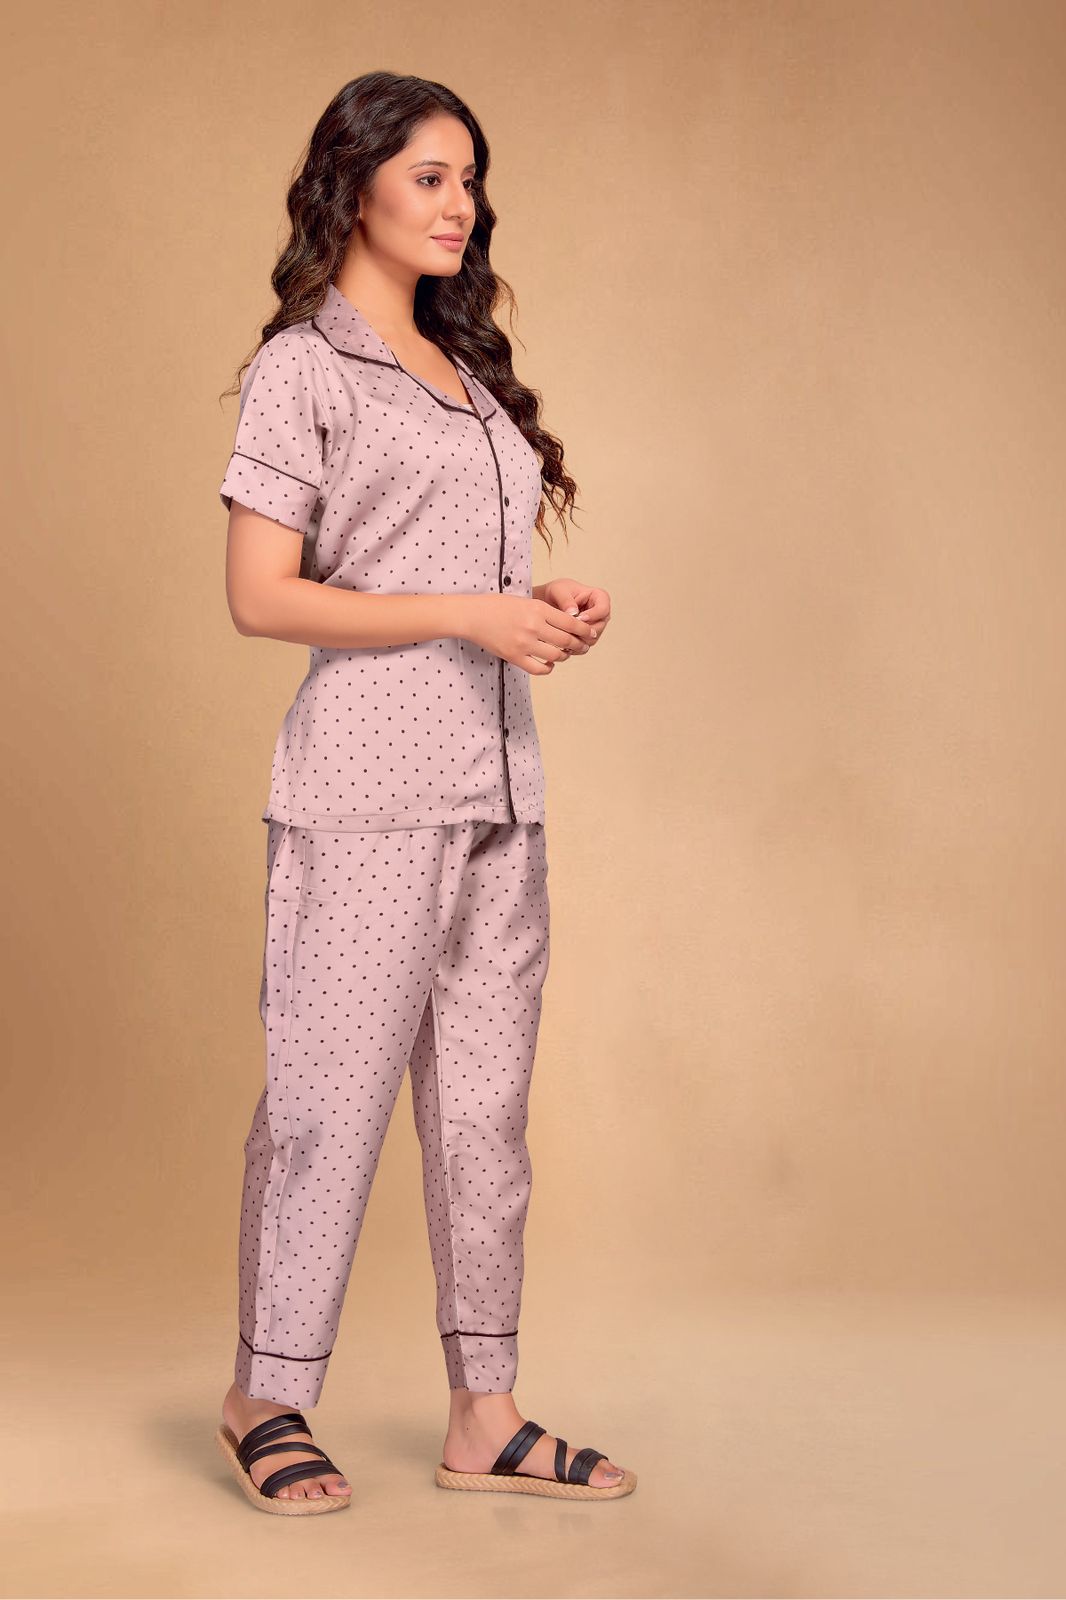 channel 9 SKU 105ND To 108ND attrective look Night Dress Top Bottom With Eye Mask size set